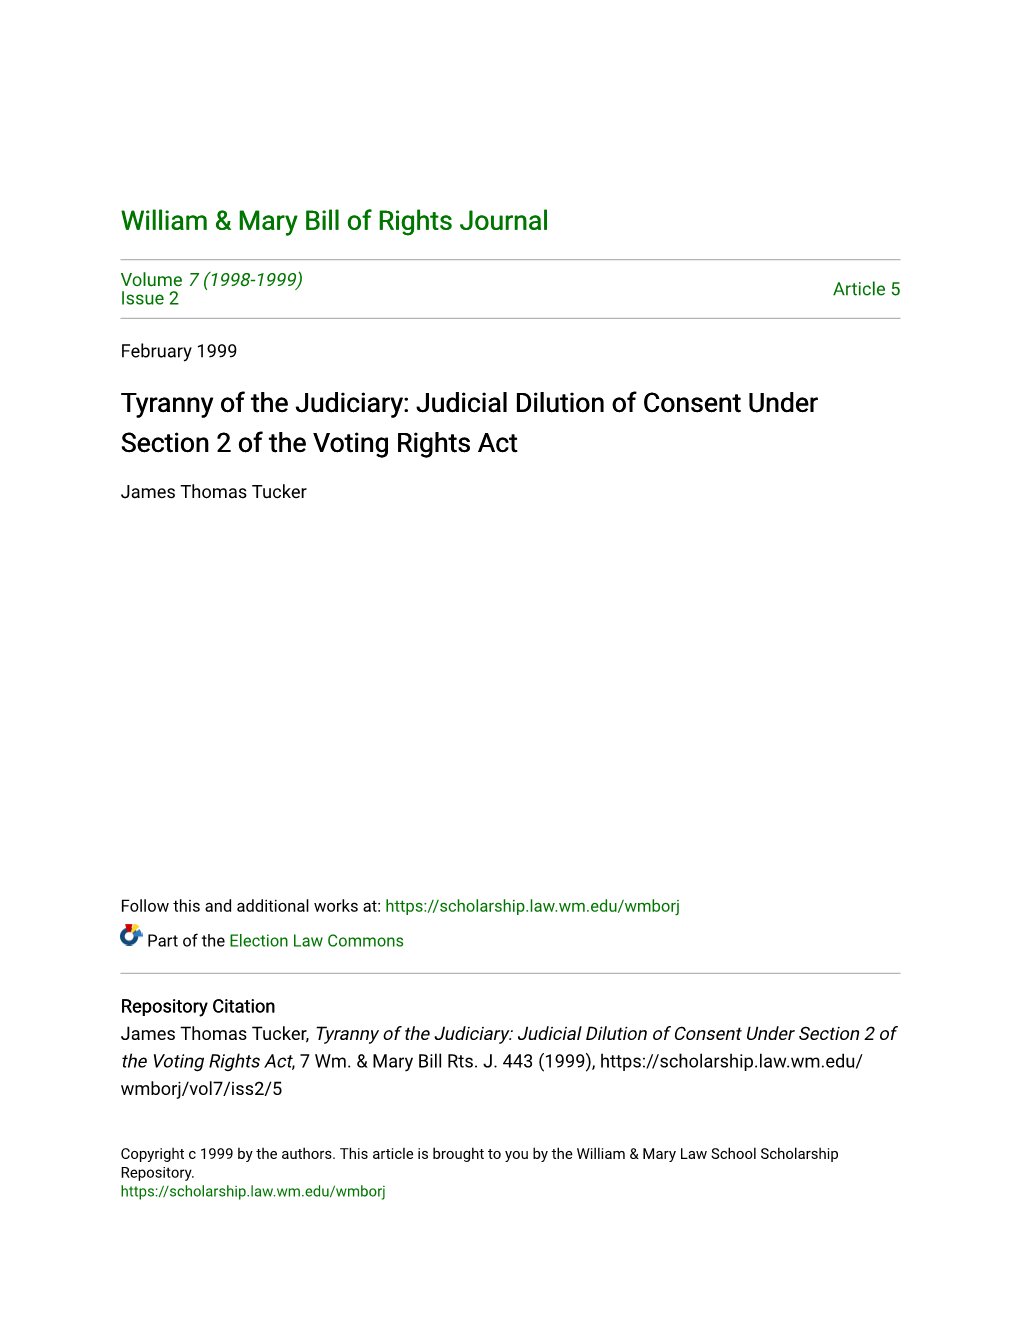 Tyranny of the Judiciary: Judicial Dilution of Consent Under Section 2 of the Voting Rights Act